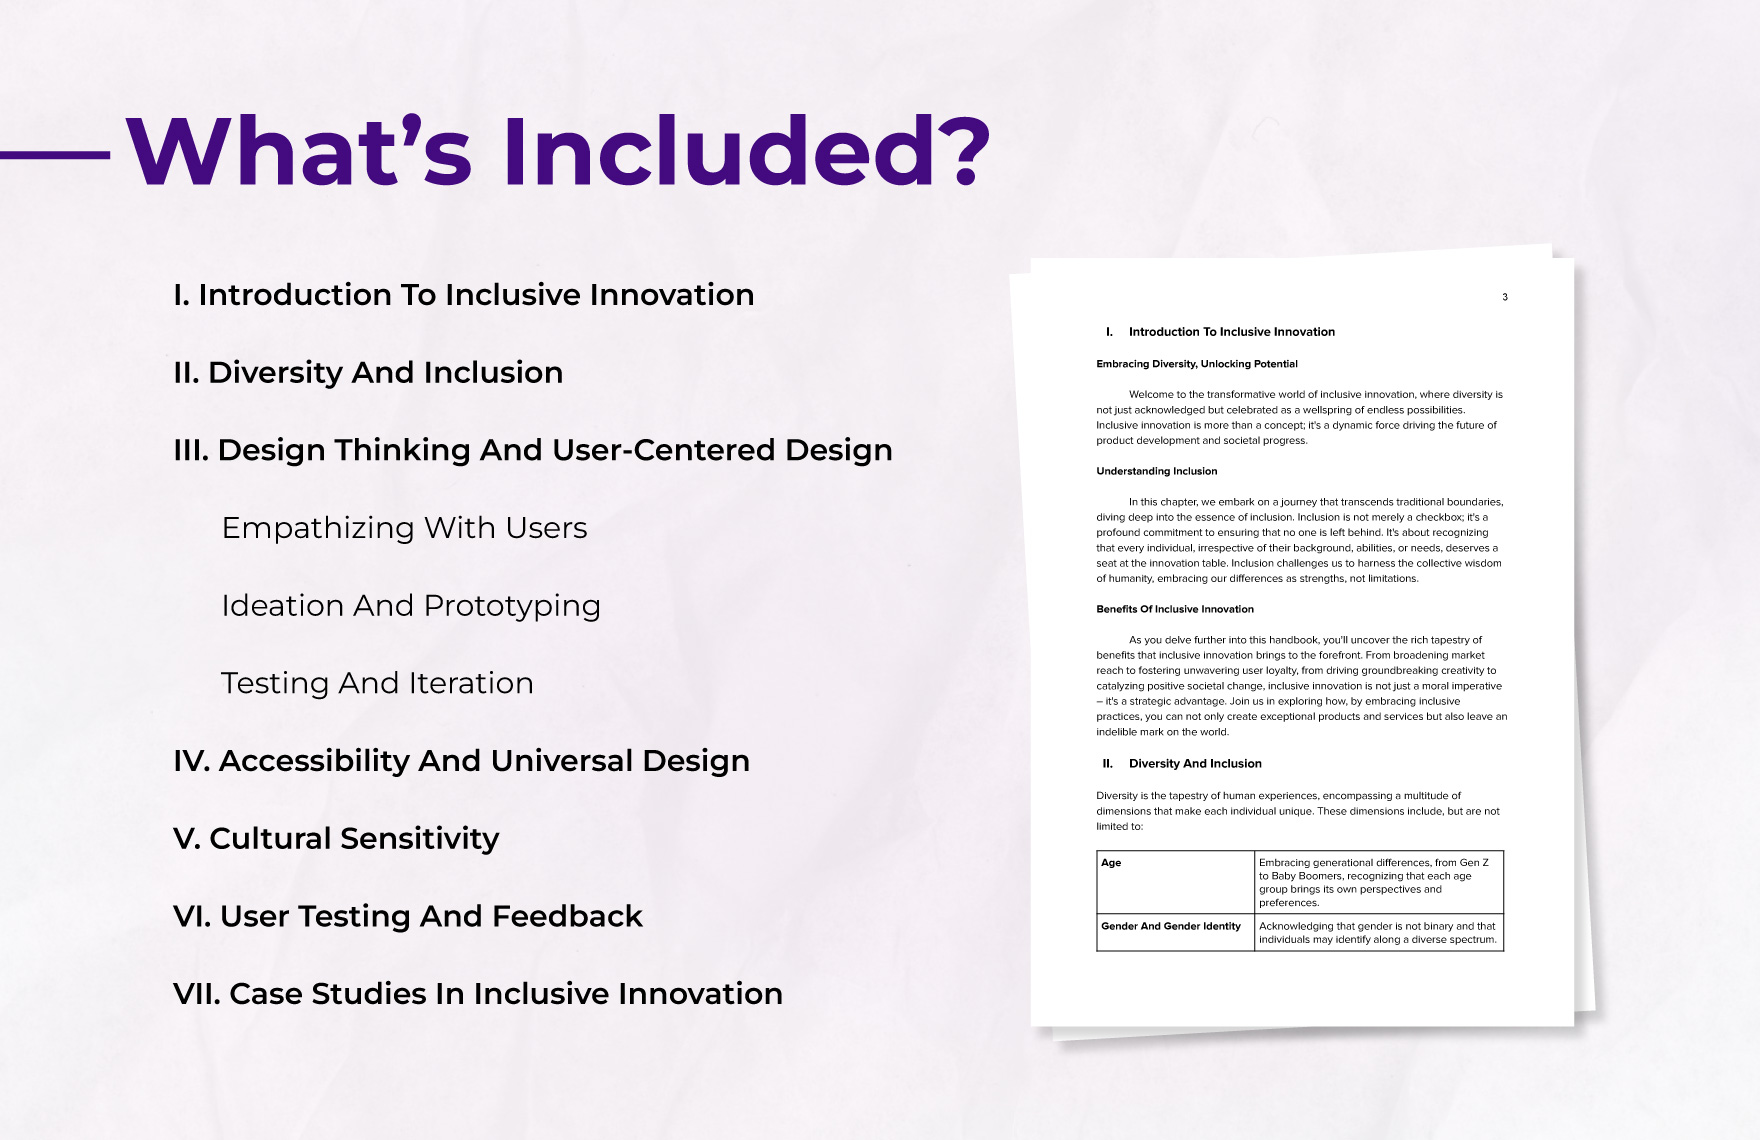 Inclusive Innovation and Product Development Handbook HR Template